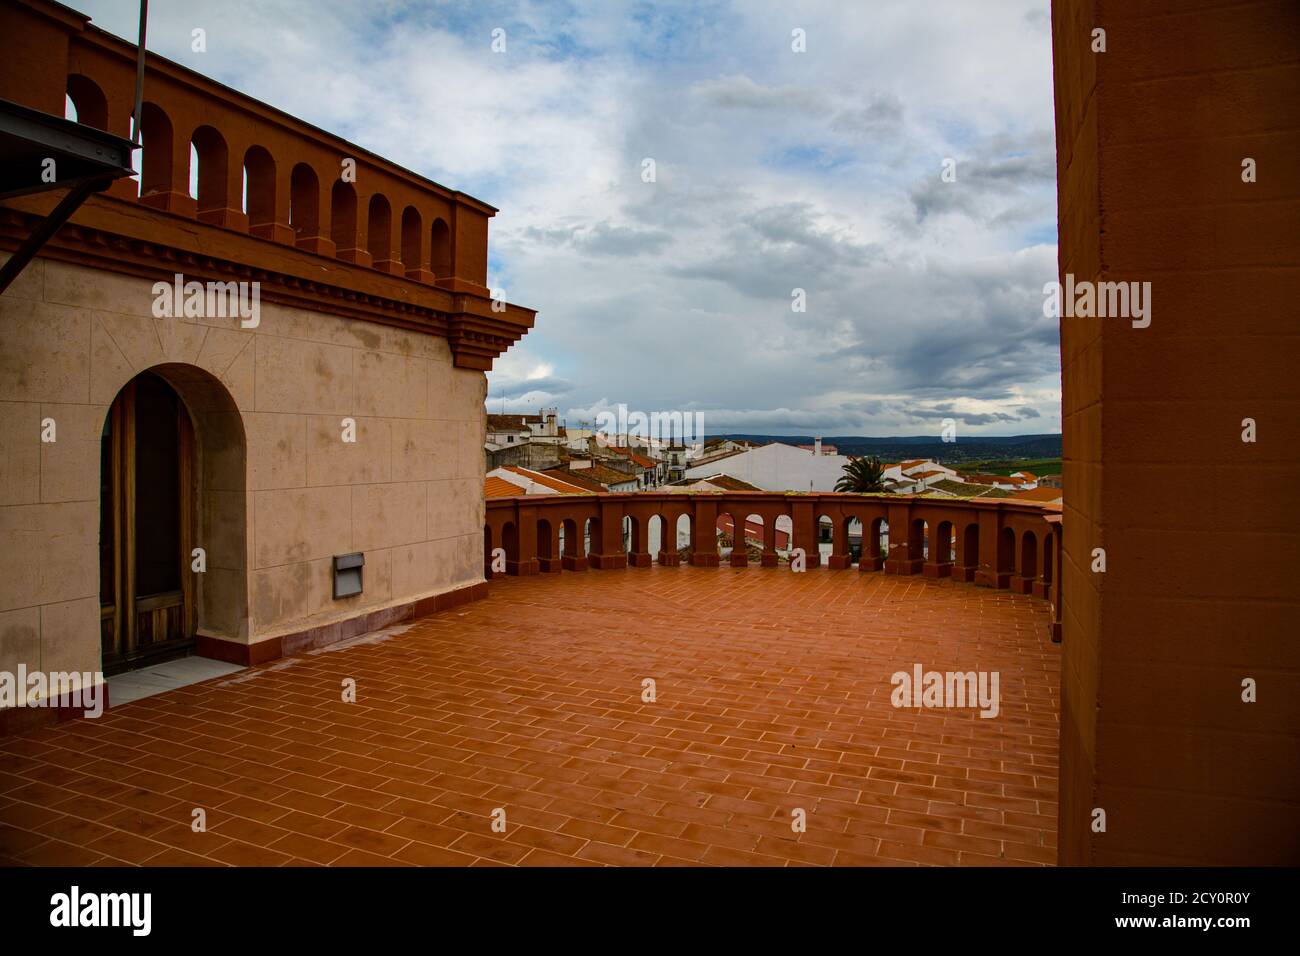 View of terrace and circular entrance with cloudy sky in the backgroun Stock Photo